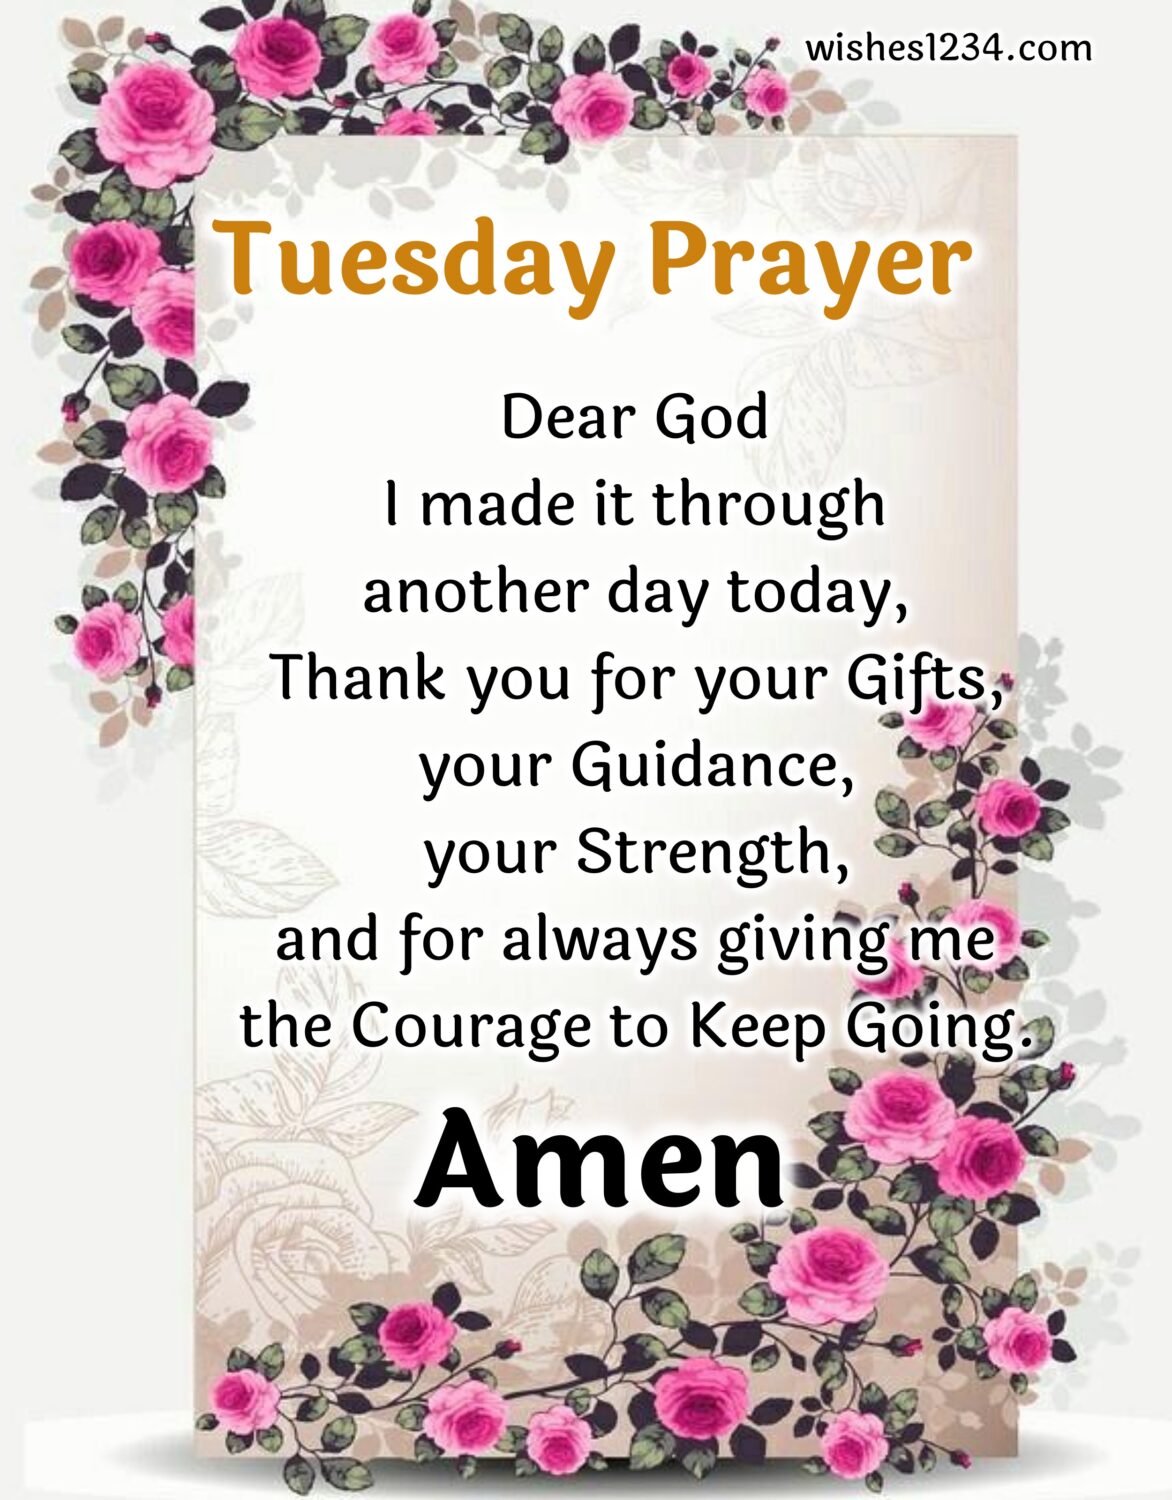 Tuesday prayer with pink roses background, Tuesday Prayers.